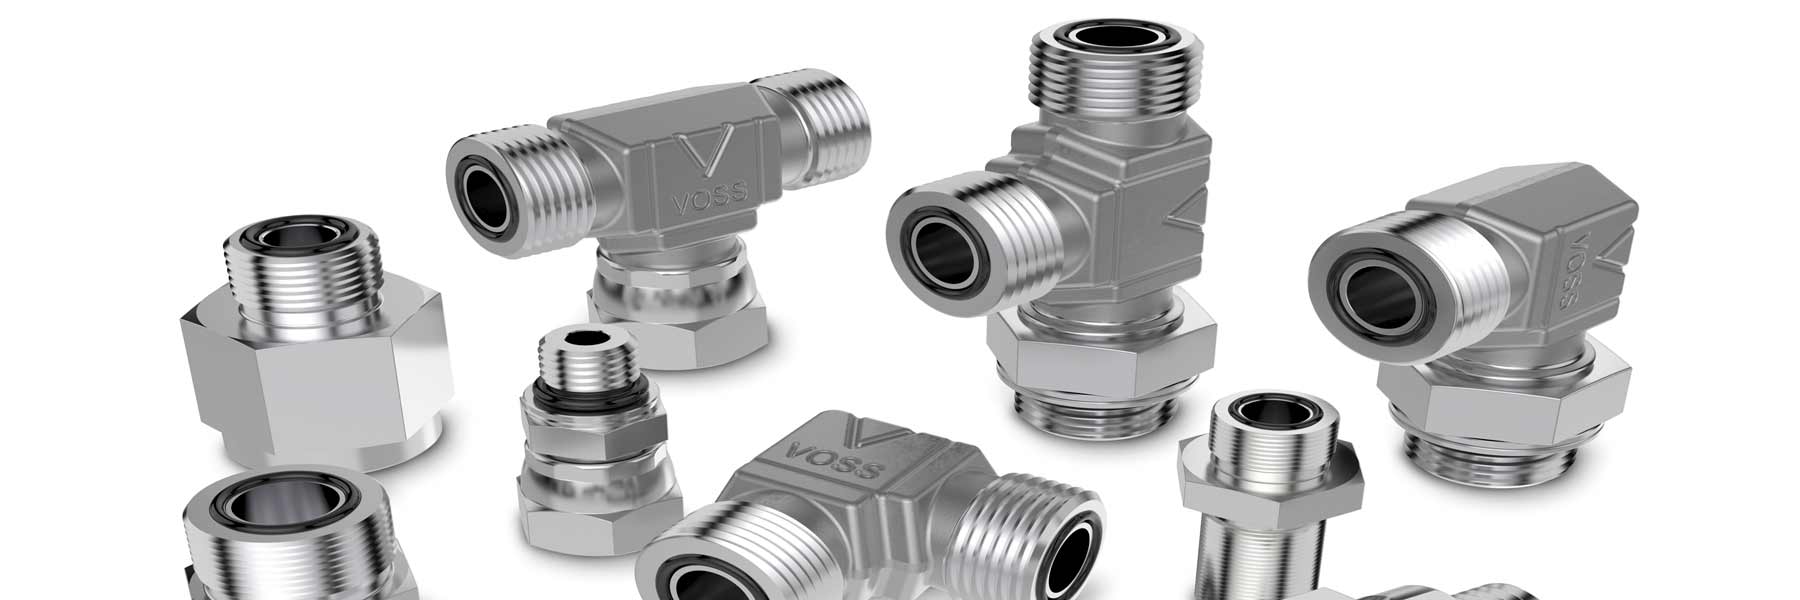 HOSE ASSEMBLIES FOR MINI AND MICRO HYDRAULICS